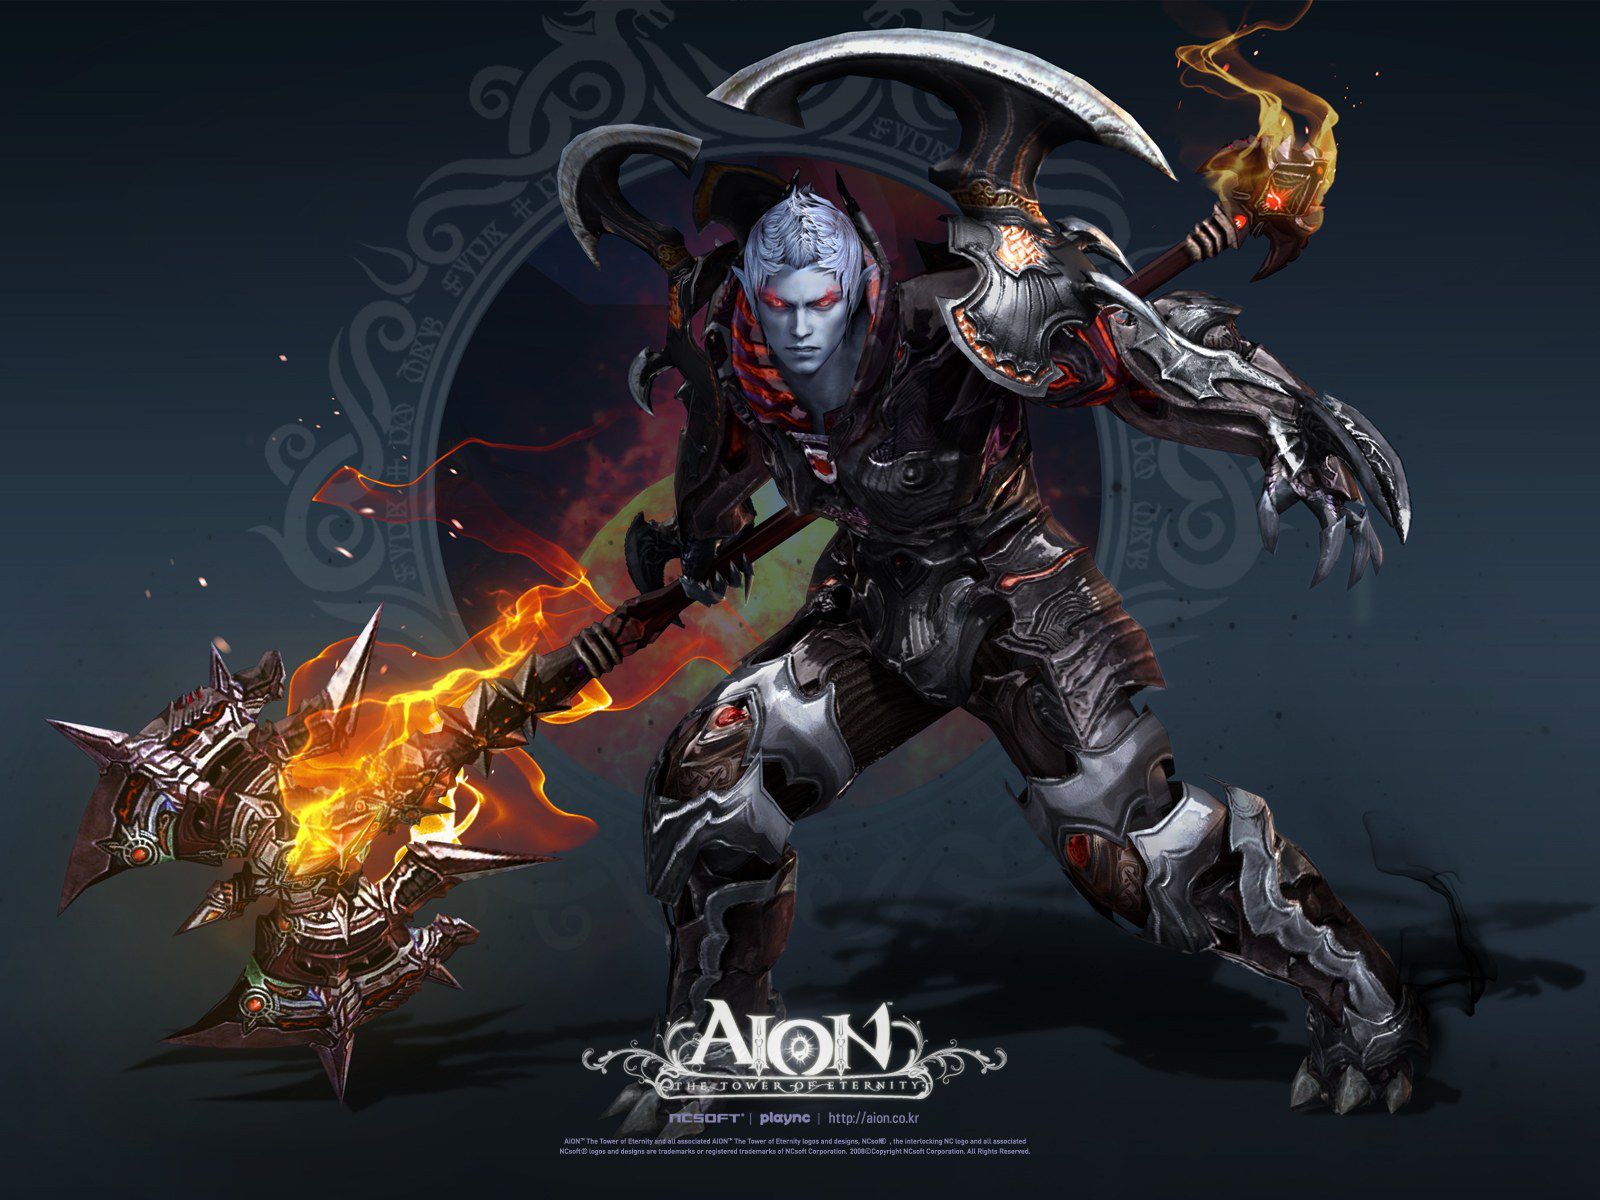 Download_Aion_Full_HD_Wallpapers-cgfrog_com_20